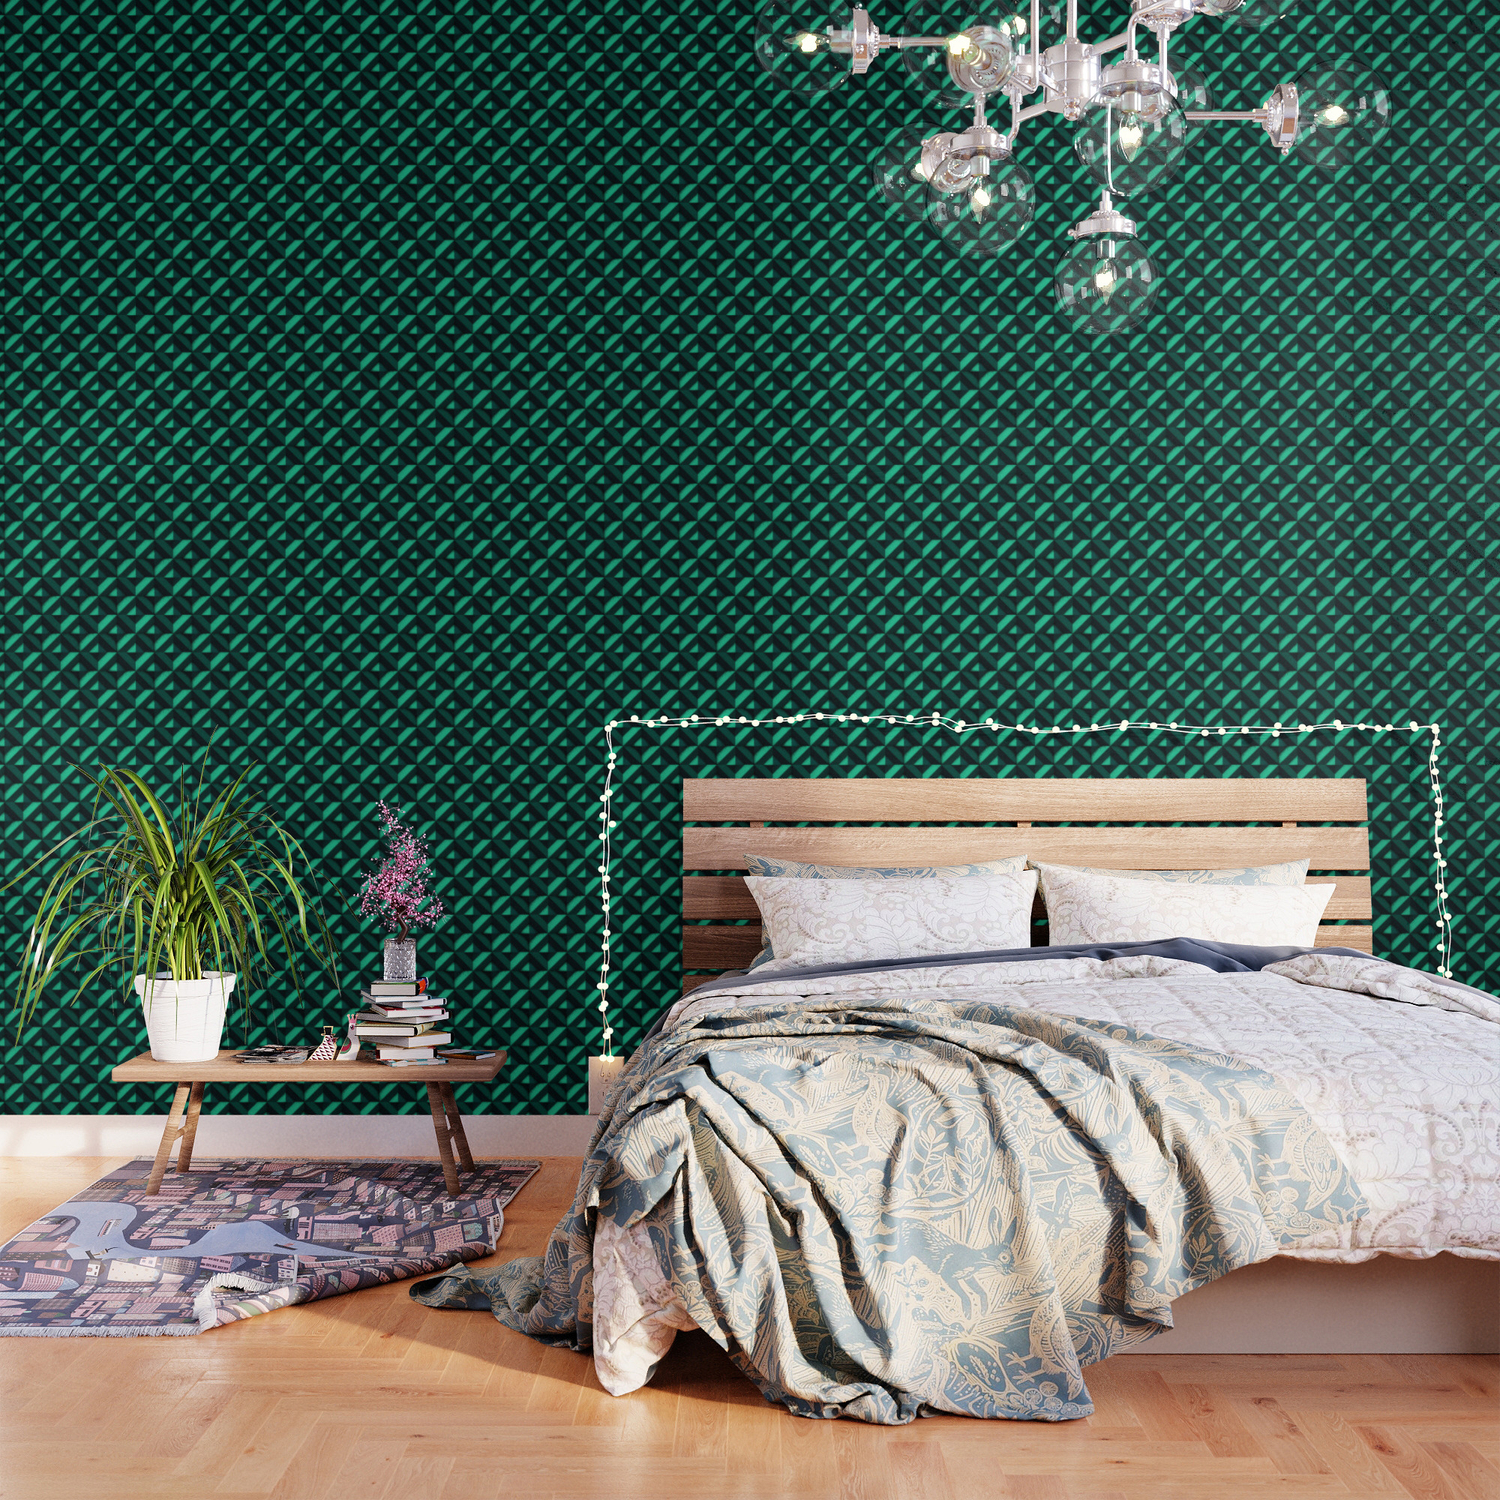 Concrete wall - Emerald green Wallpaper by Rather Swell (Inkeri Kangas) |  Society6